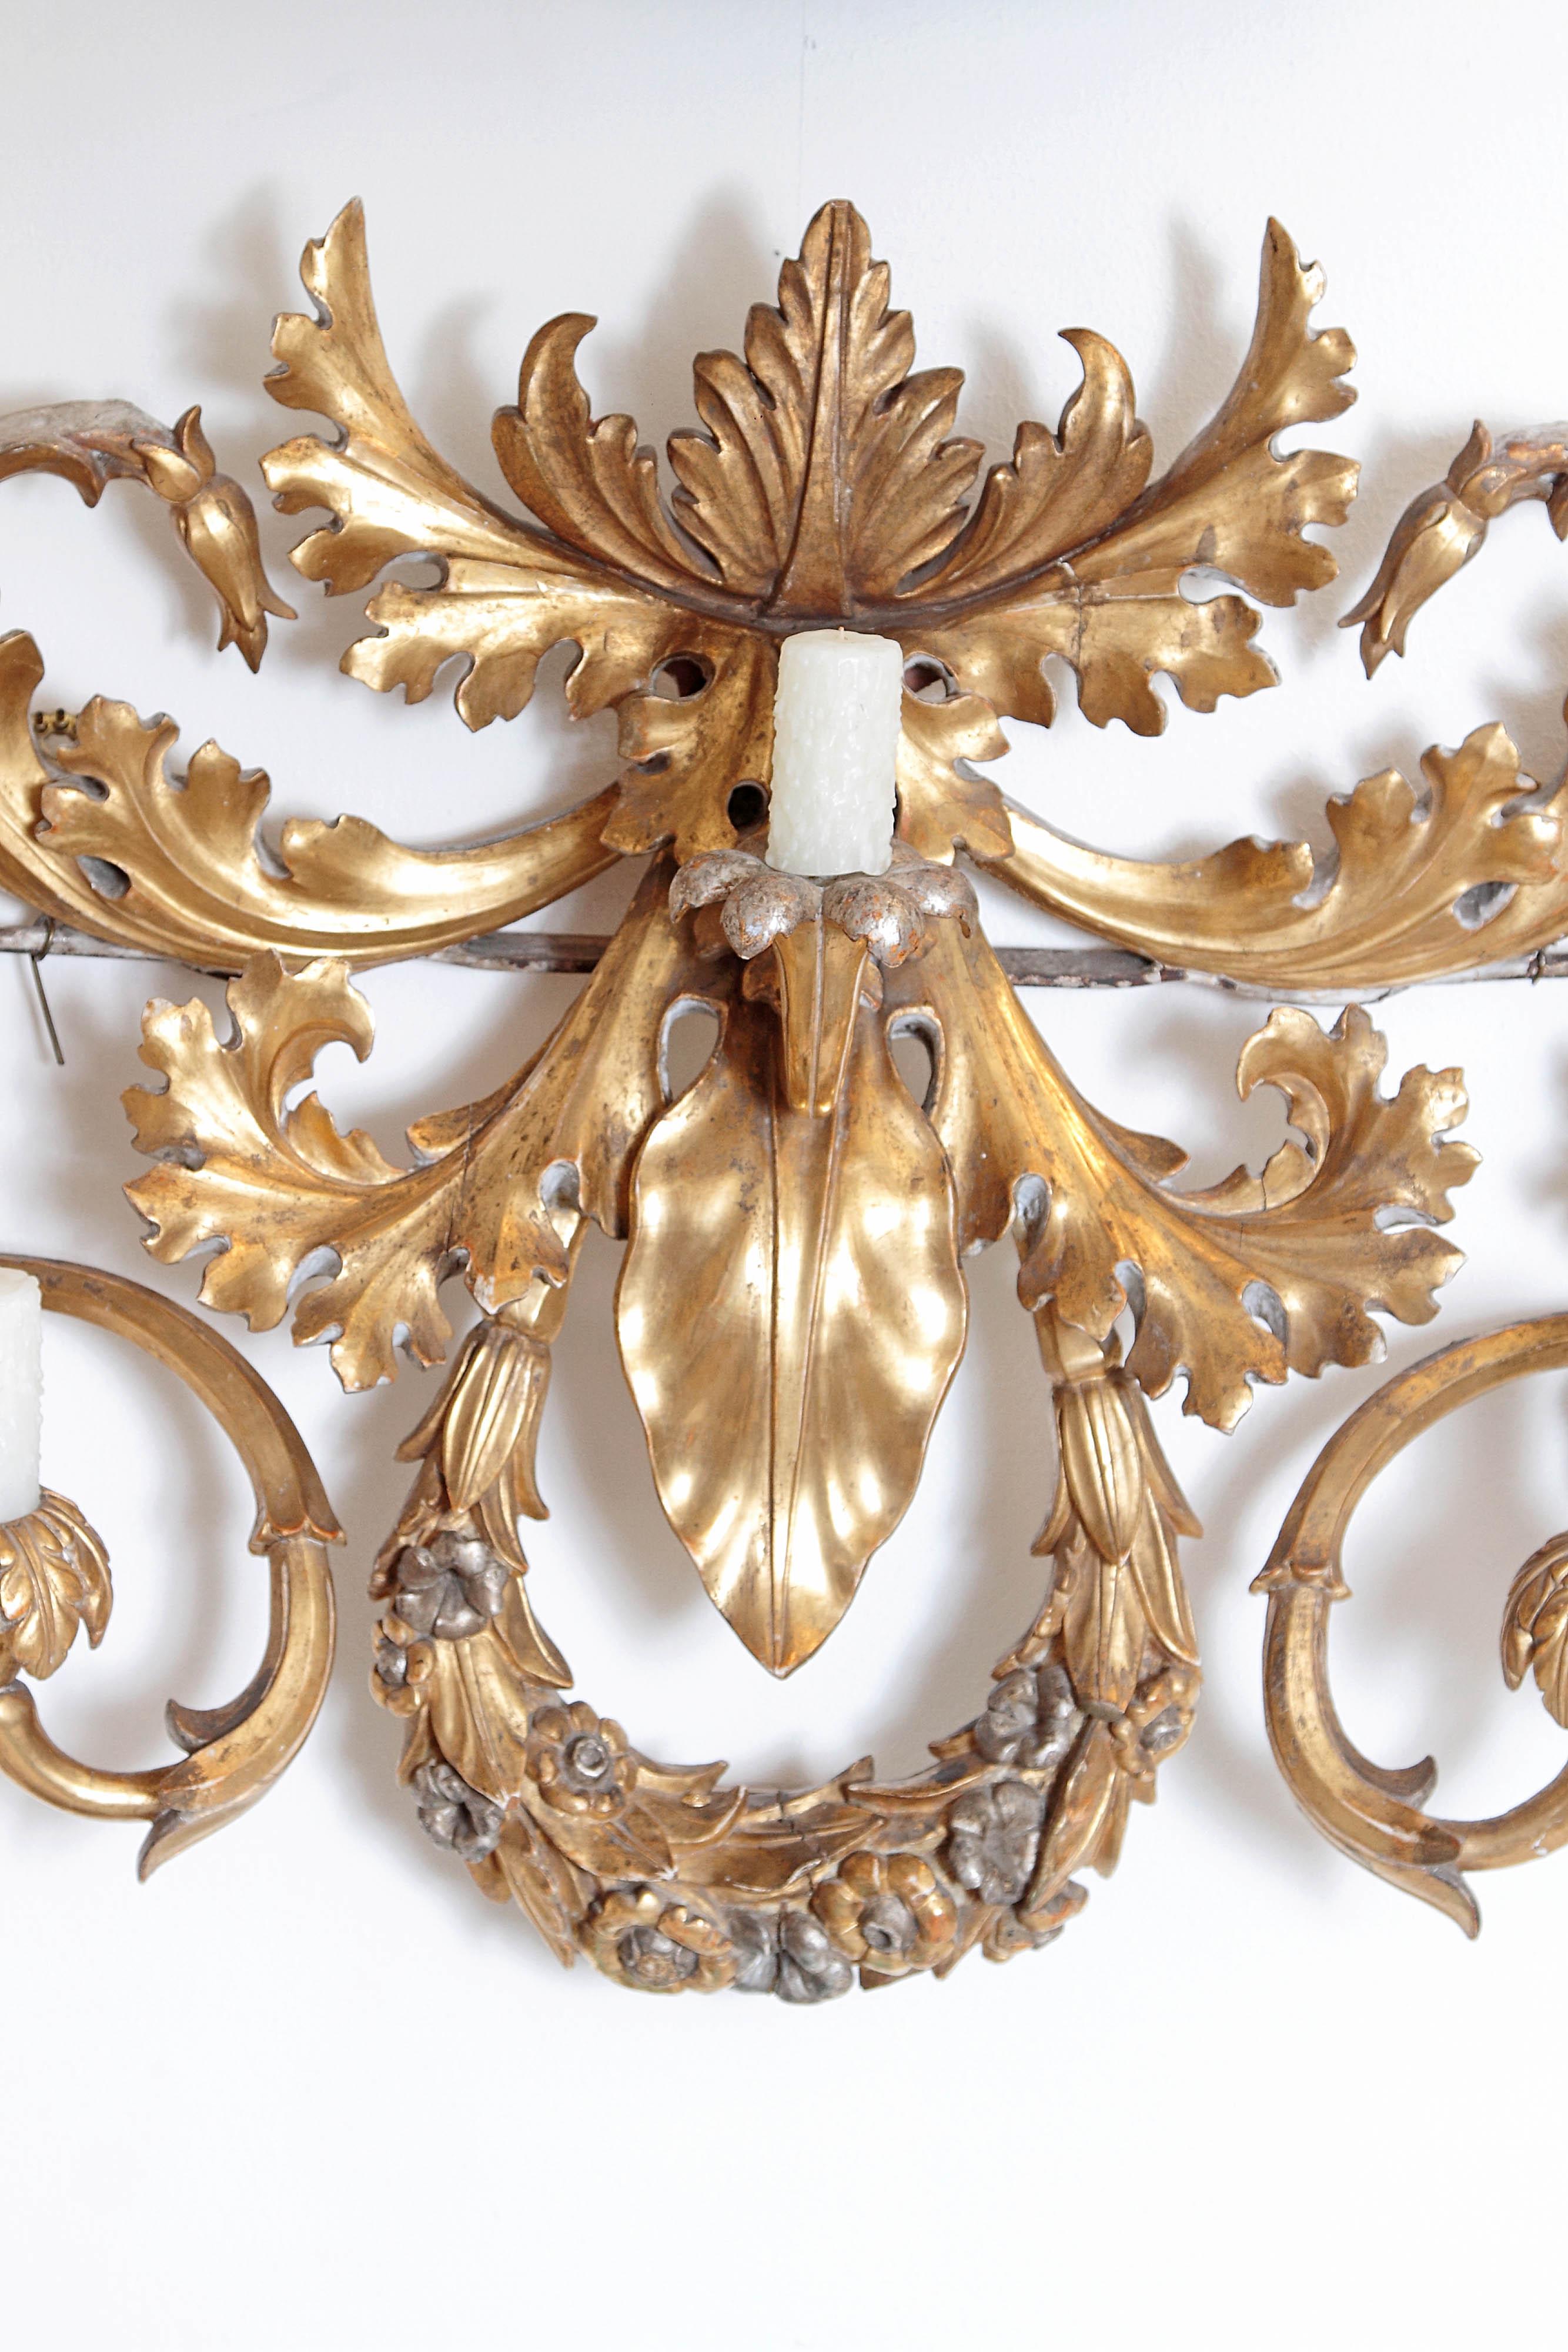 An oversized / large seven-arm gilt carved-wood and gesso wall sconce, gilded gold with silver accents, Baroque-style, undulating acanthus leaves swirls and curve to make the various candle arms, a floral wreath at centre bottom, large single